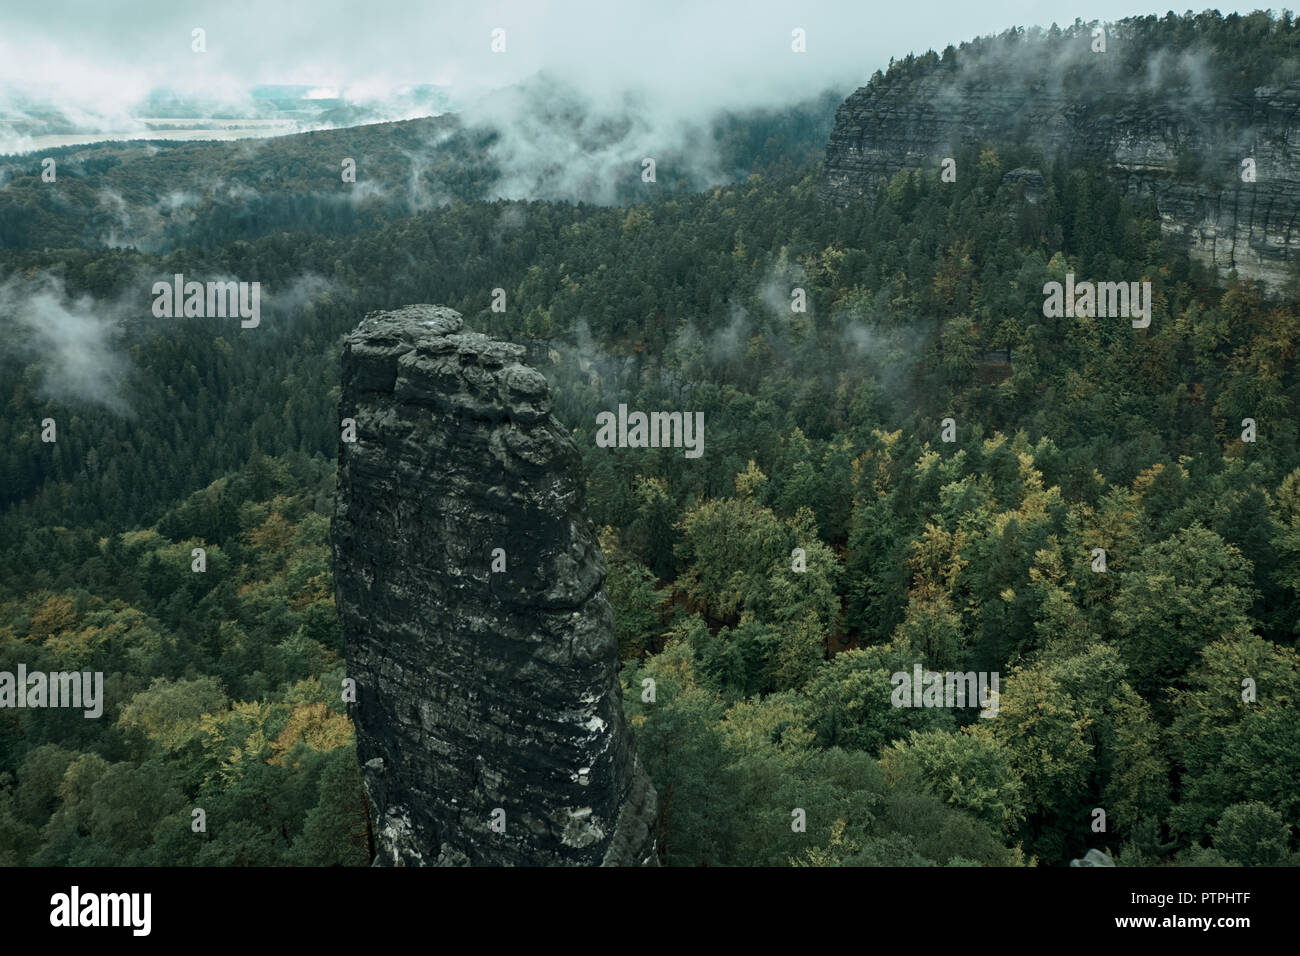 Sandstone rock tower in the deep autumn valley of national park Bohemian Switzerland. Misty landscape with fir forest in hipster vintage retro style. Stock Photo